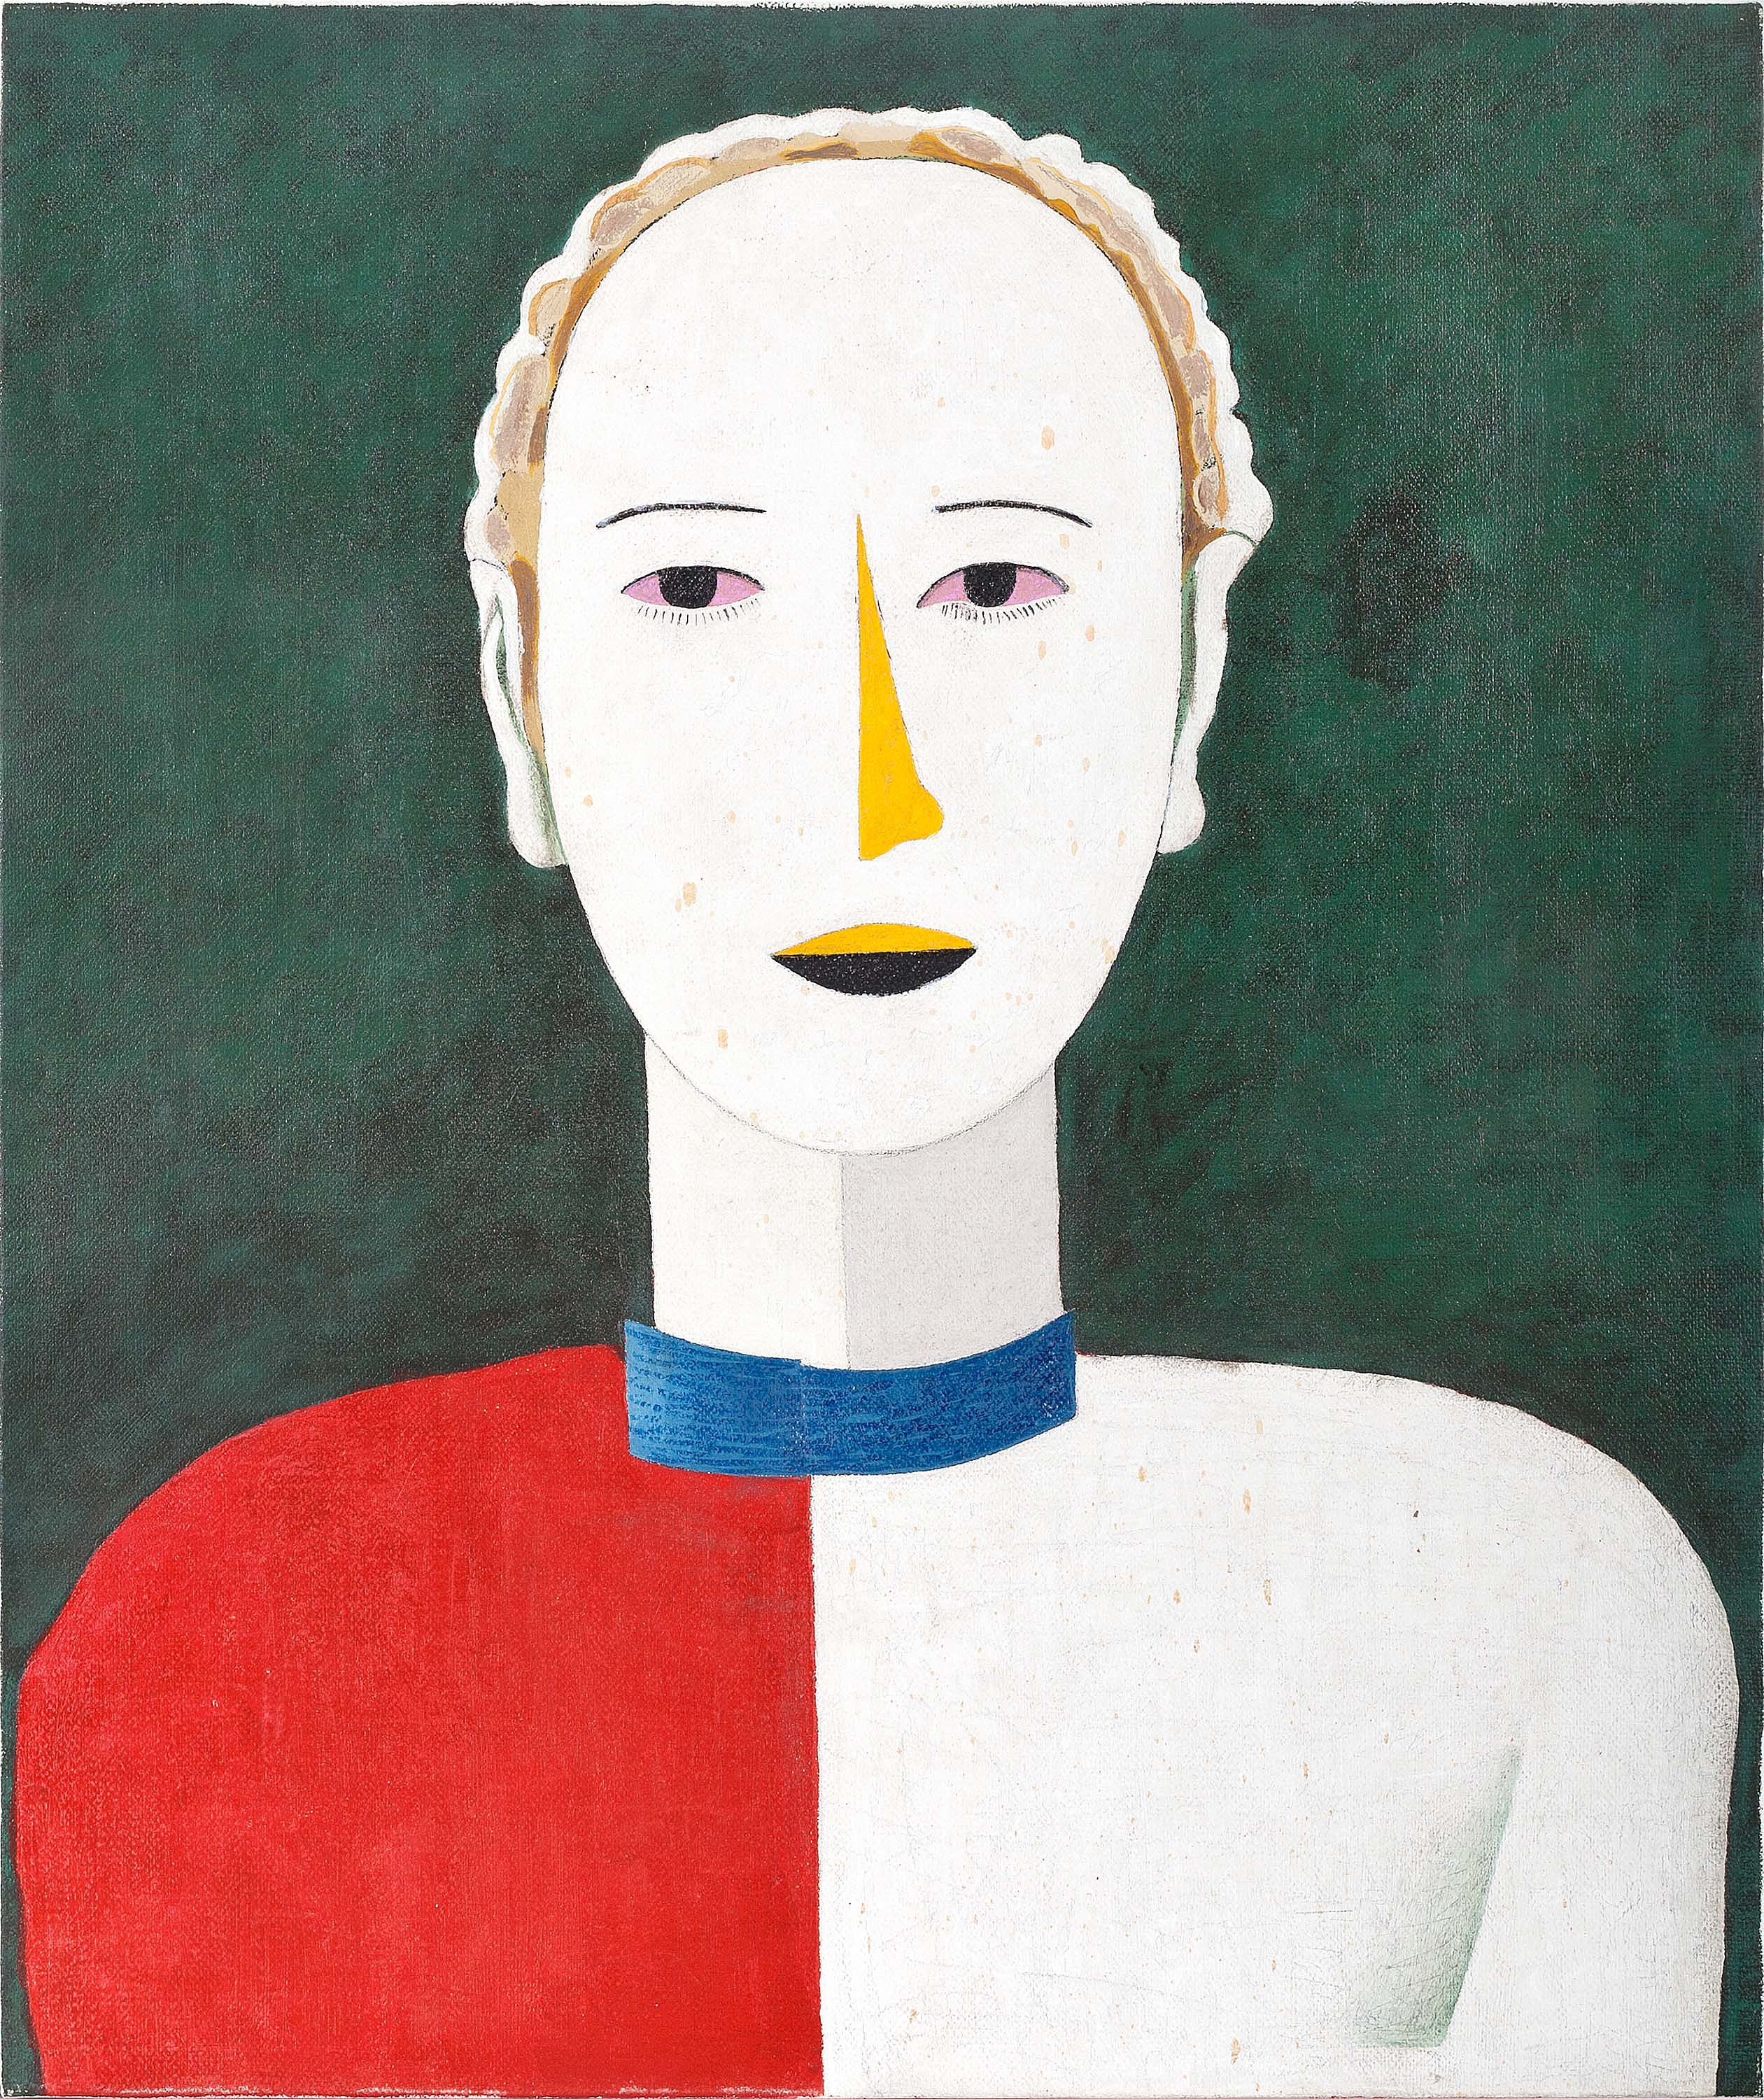 PORTRAIT. COPY OF THE PAINTING BY MALEVICH